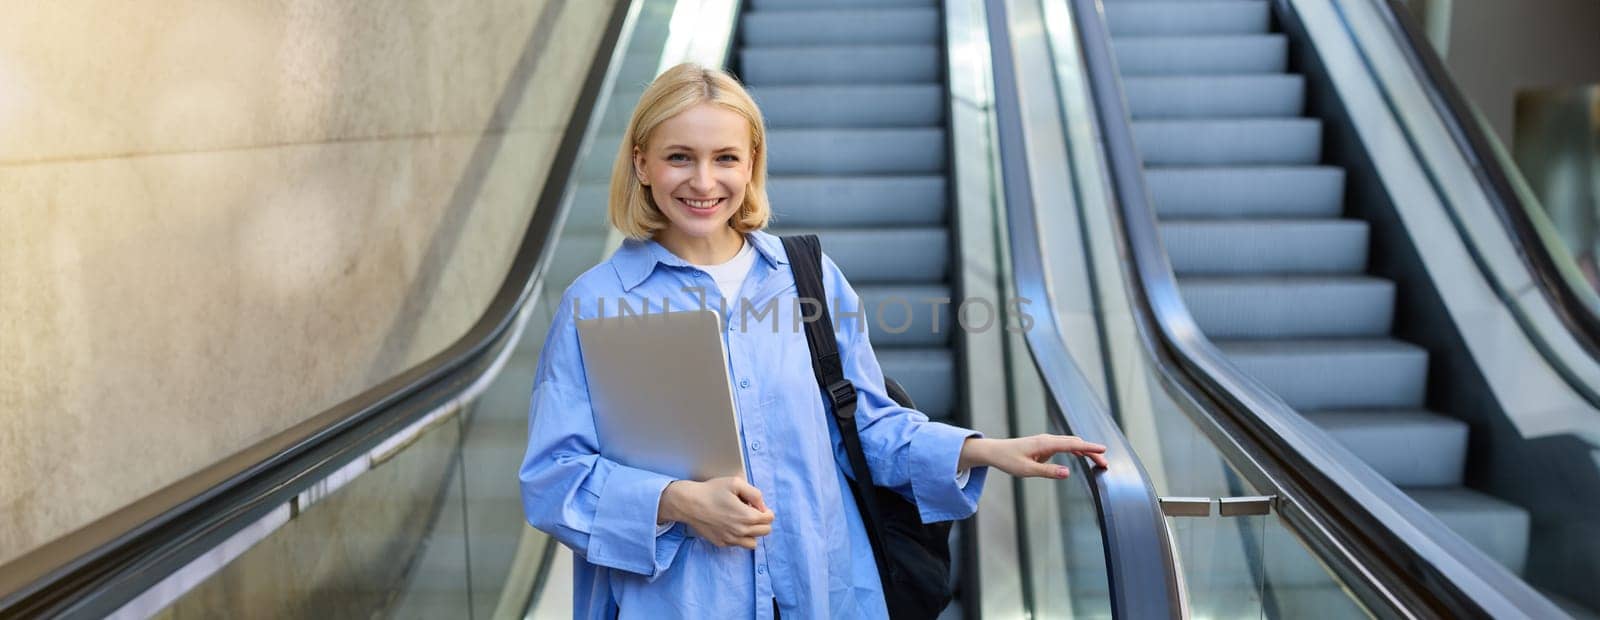 Street style portrait of woman on escalator, holding laptop and backpack on her shoulder, smiling at camera, walking in city.